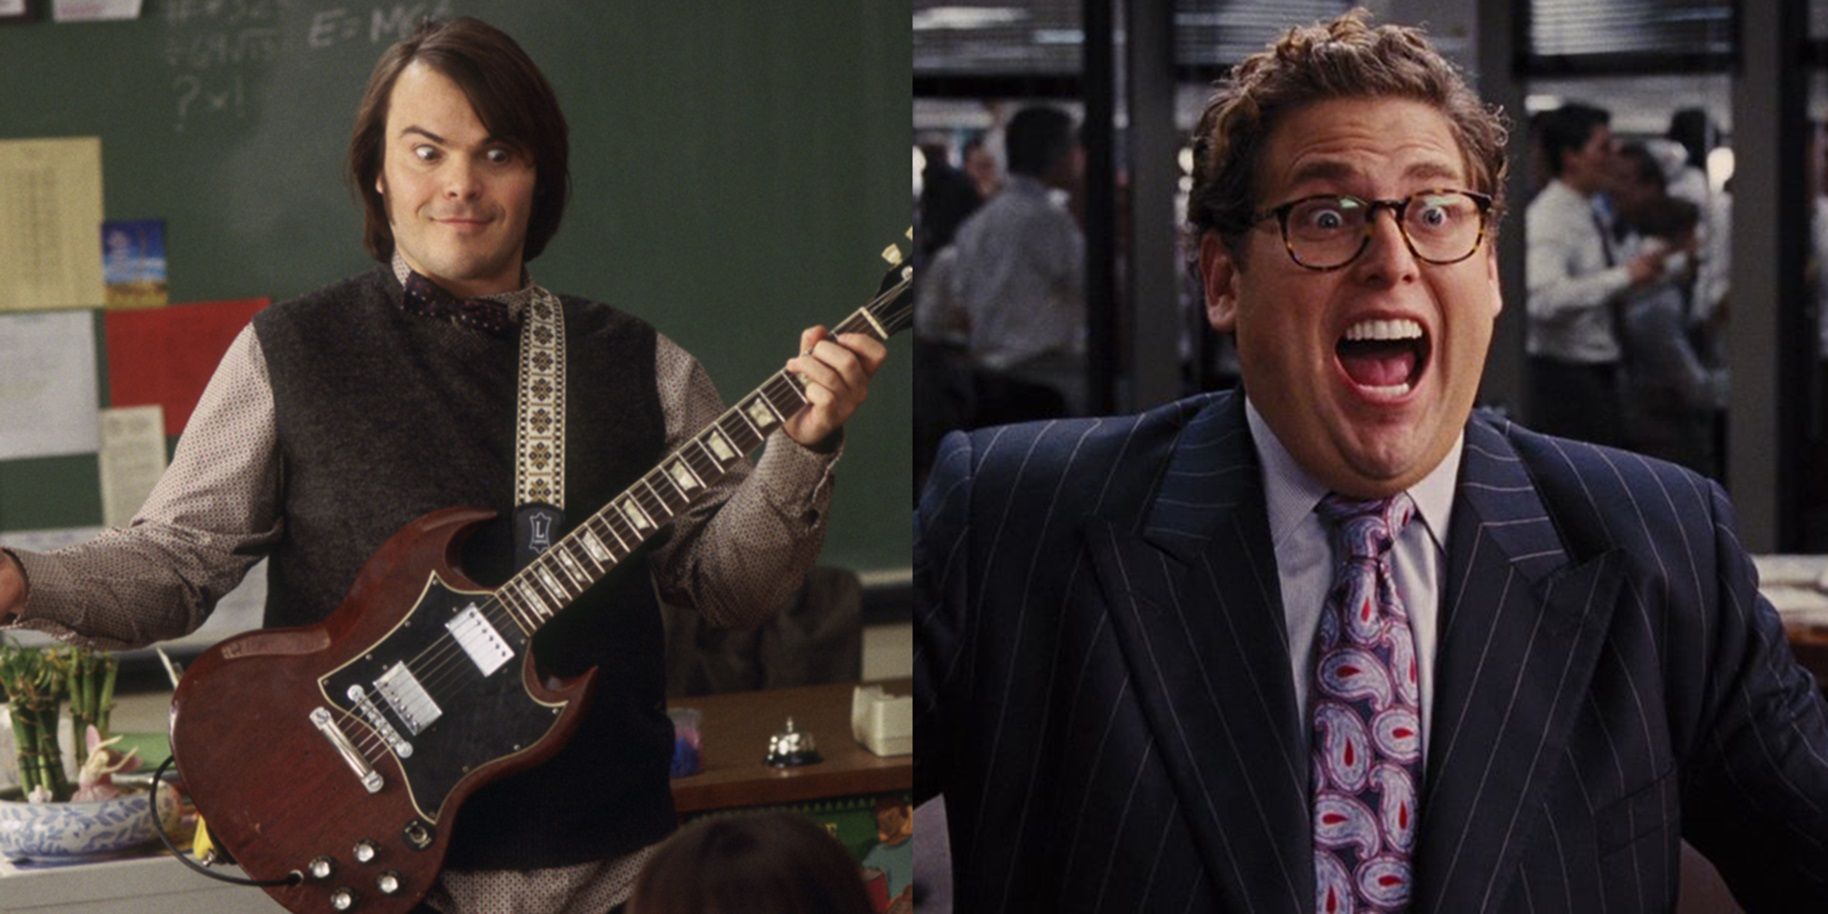 Split image of Jack Black in School of Rock and Jonah Hill in The Wolf of Wall Street